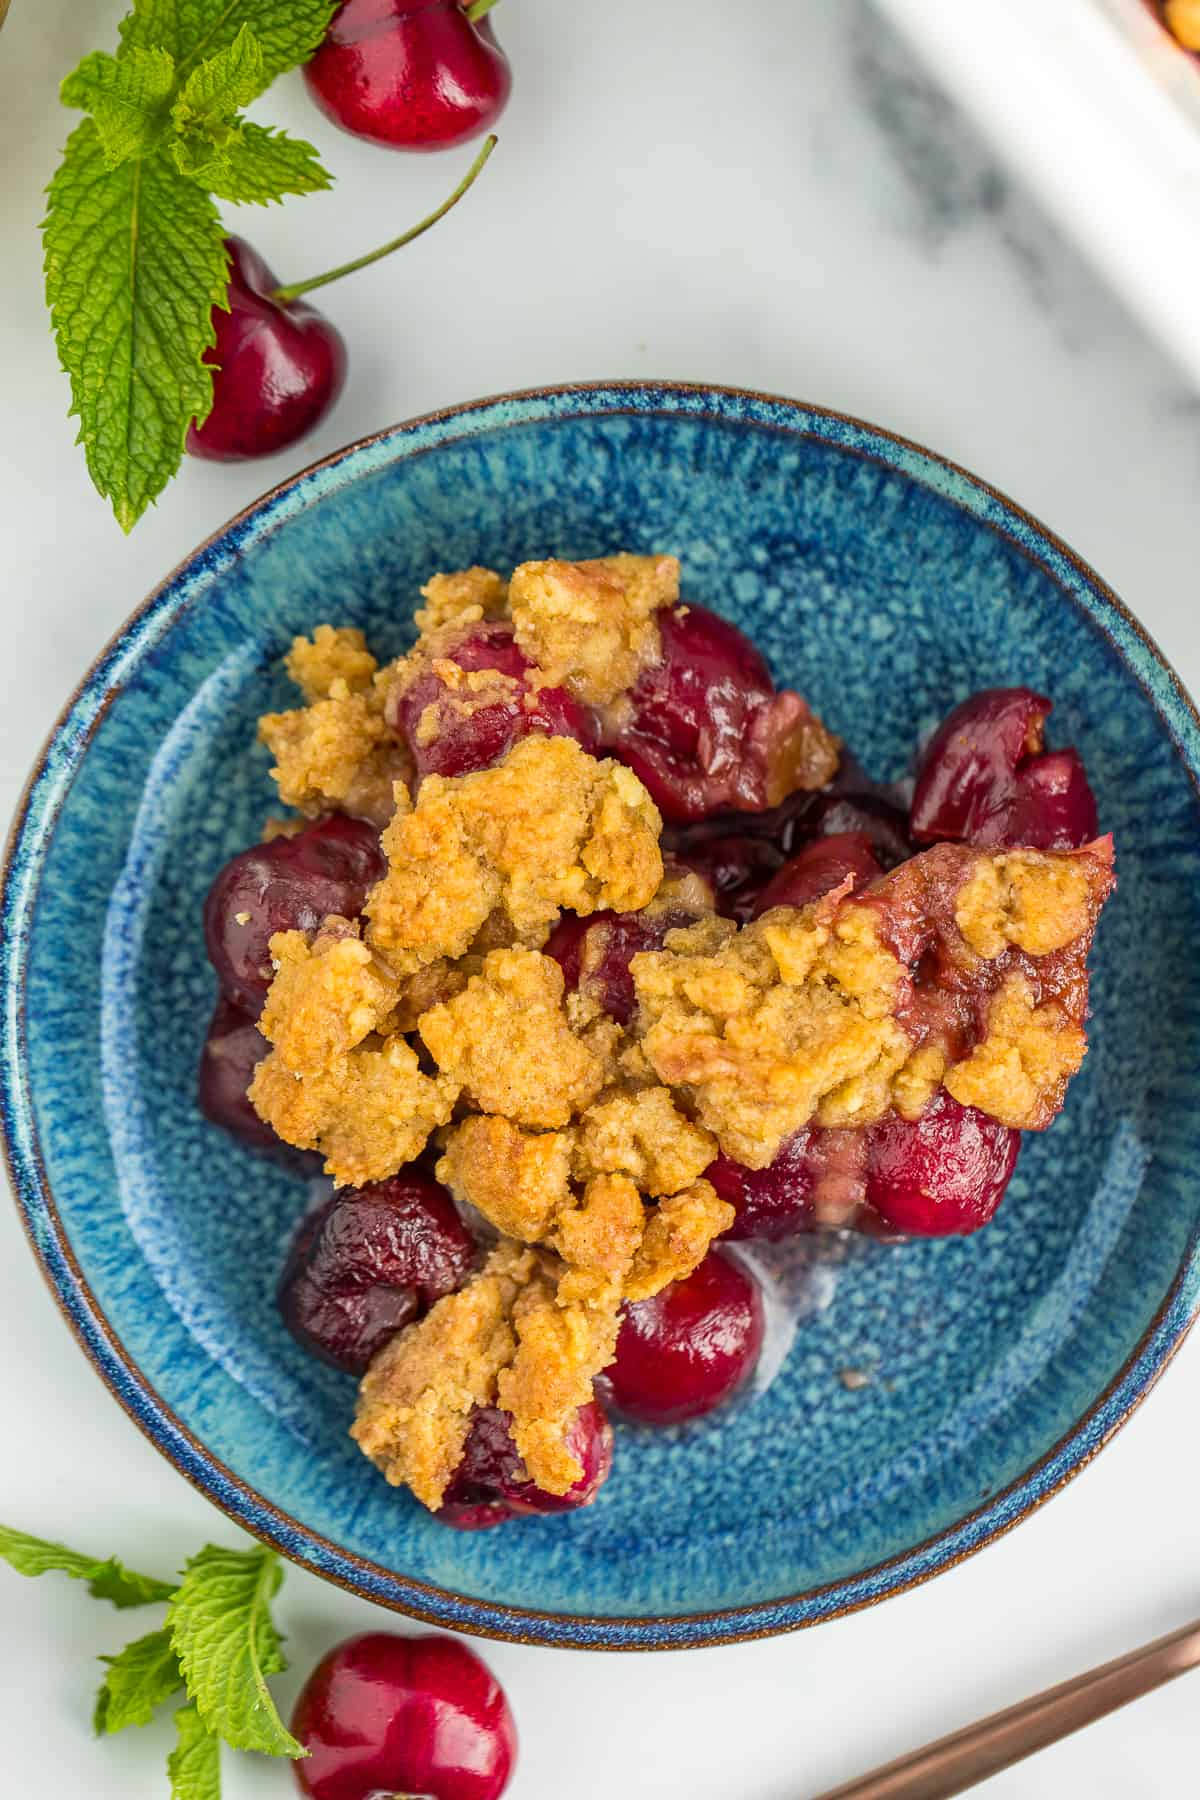 a blue dish with a serving of cherry crisp. There are fresh cherries and mint on a grey board with the plate.